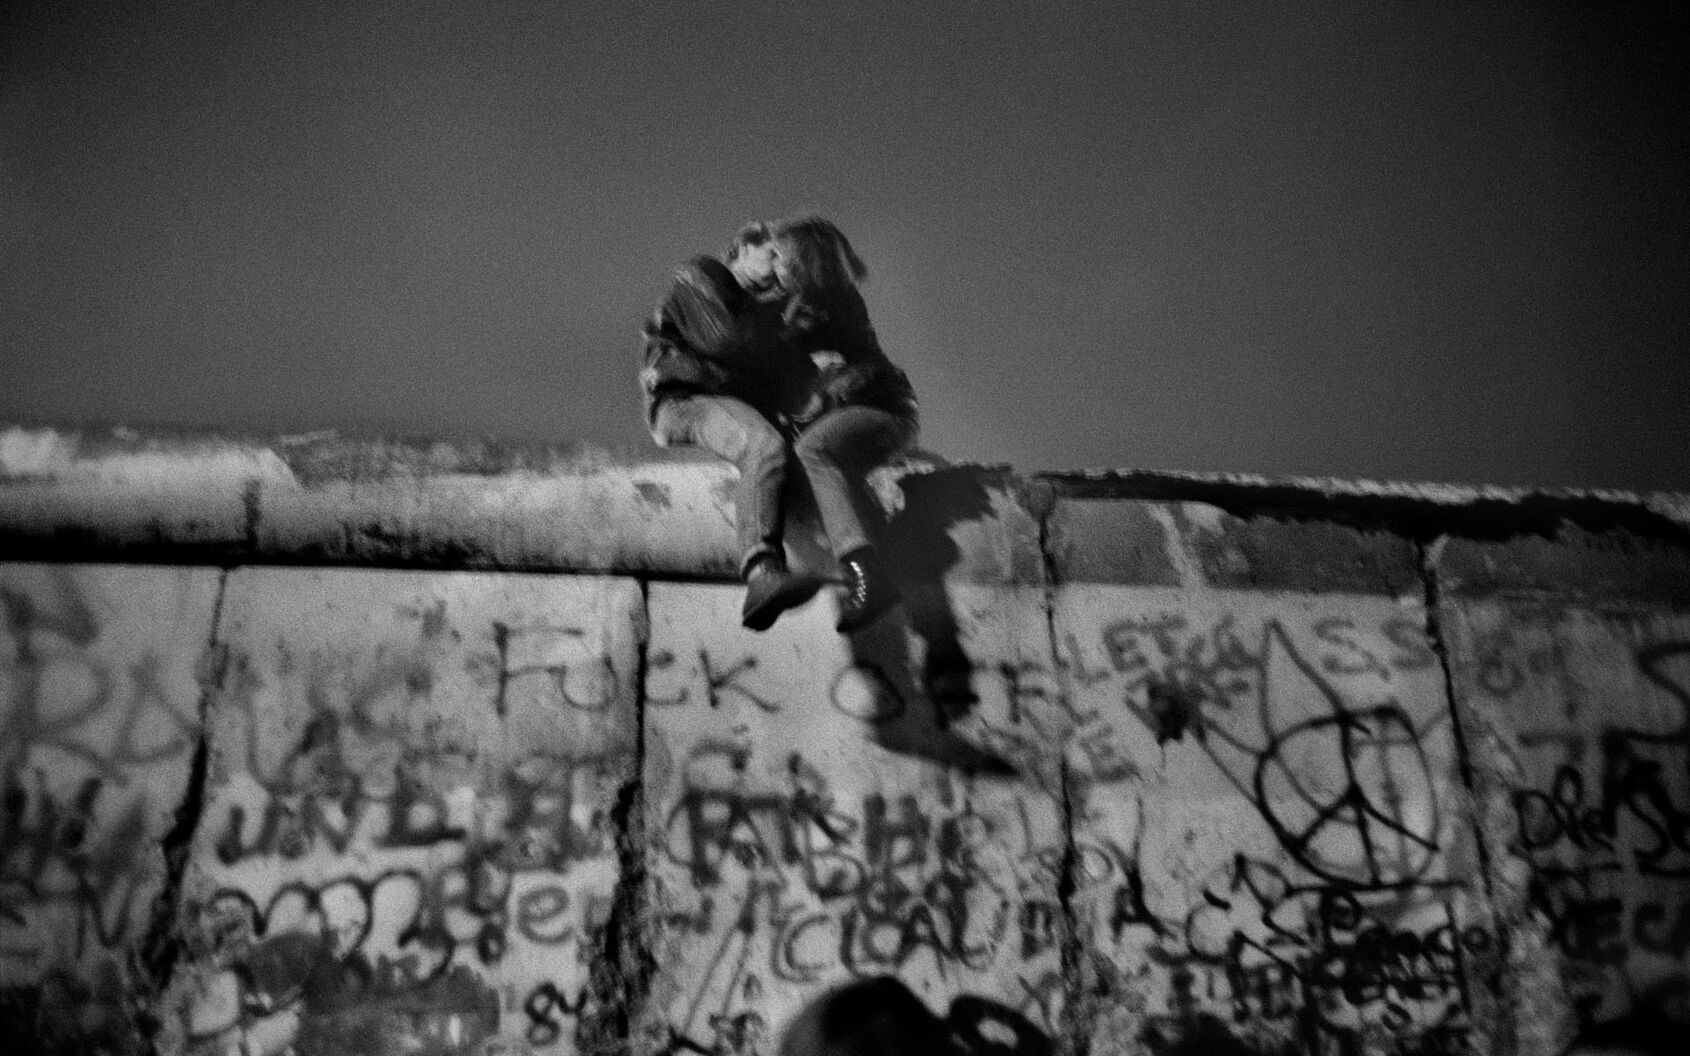 Guy Le Querrec, Germany. Berlin. On the wall, people celebrating New Year's Eve. Near the Brandenurg Gate, after the fall of the wall in November 1989. Sunday 31st December, 1989 (around midnight). ©Guy Le Querrec/Magnum Photos